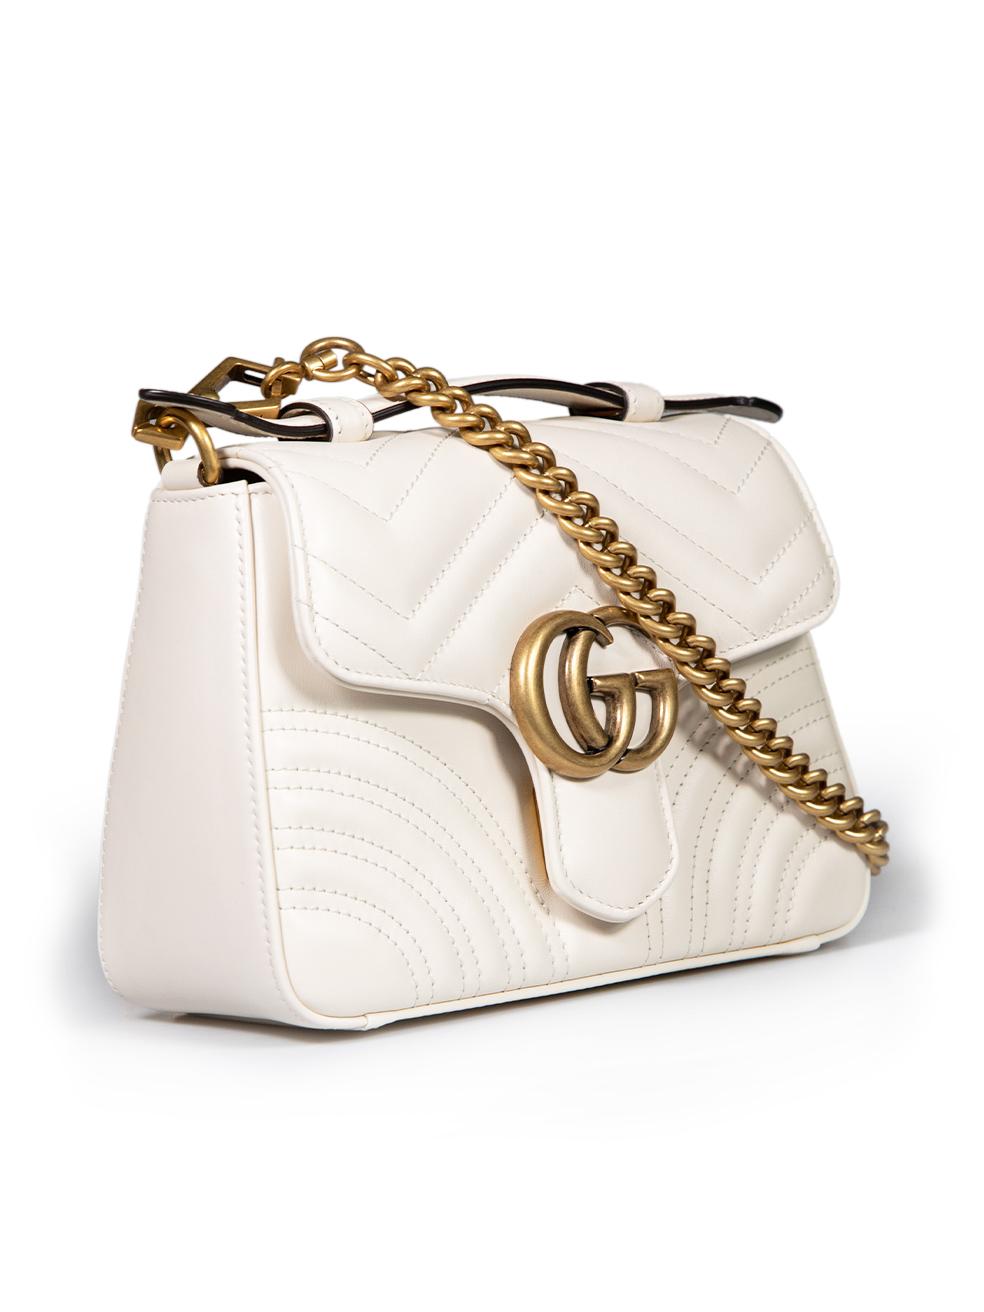 CONDITION is Never worn, however tiny scratch is seen to clasp hardware due to poor storage on this new Gucci designer resale item. This item comes with original dust bag and box.
 
 
 
 Details
 
 
 Model: GG Marmont
 
 White
 
 Leather
 
 Mini top